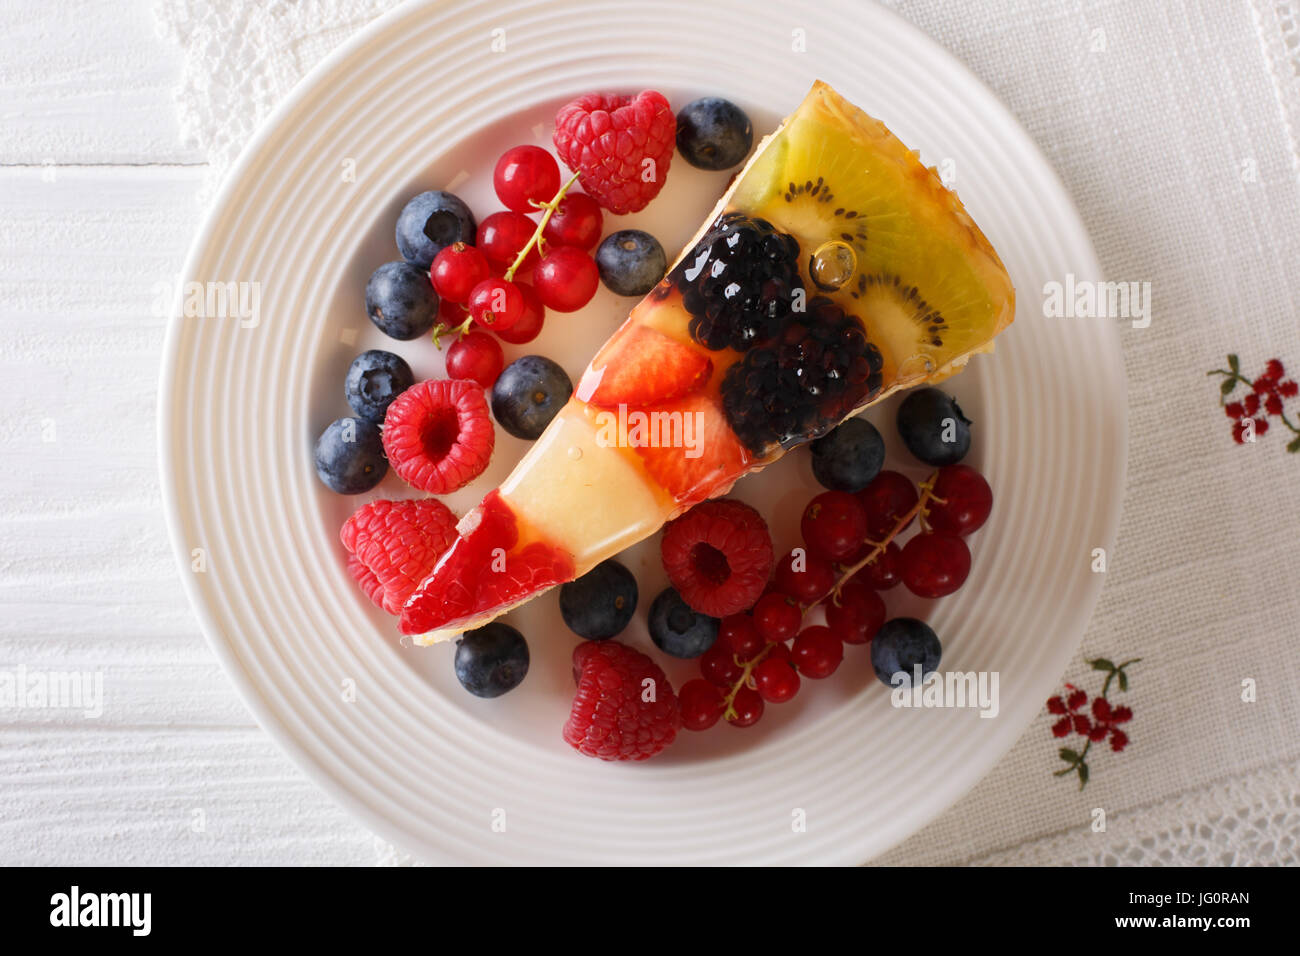 Delicious Slice of fruit berry cake close-up on a plate. Horizontal top view blue Stock Photo